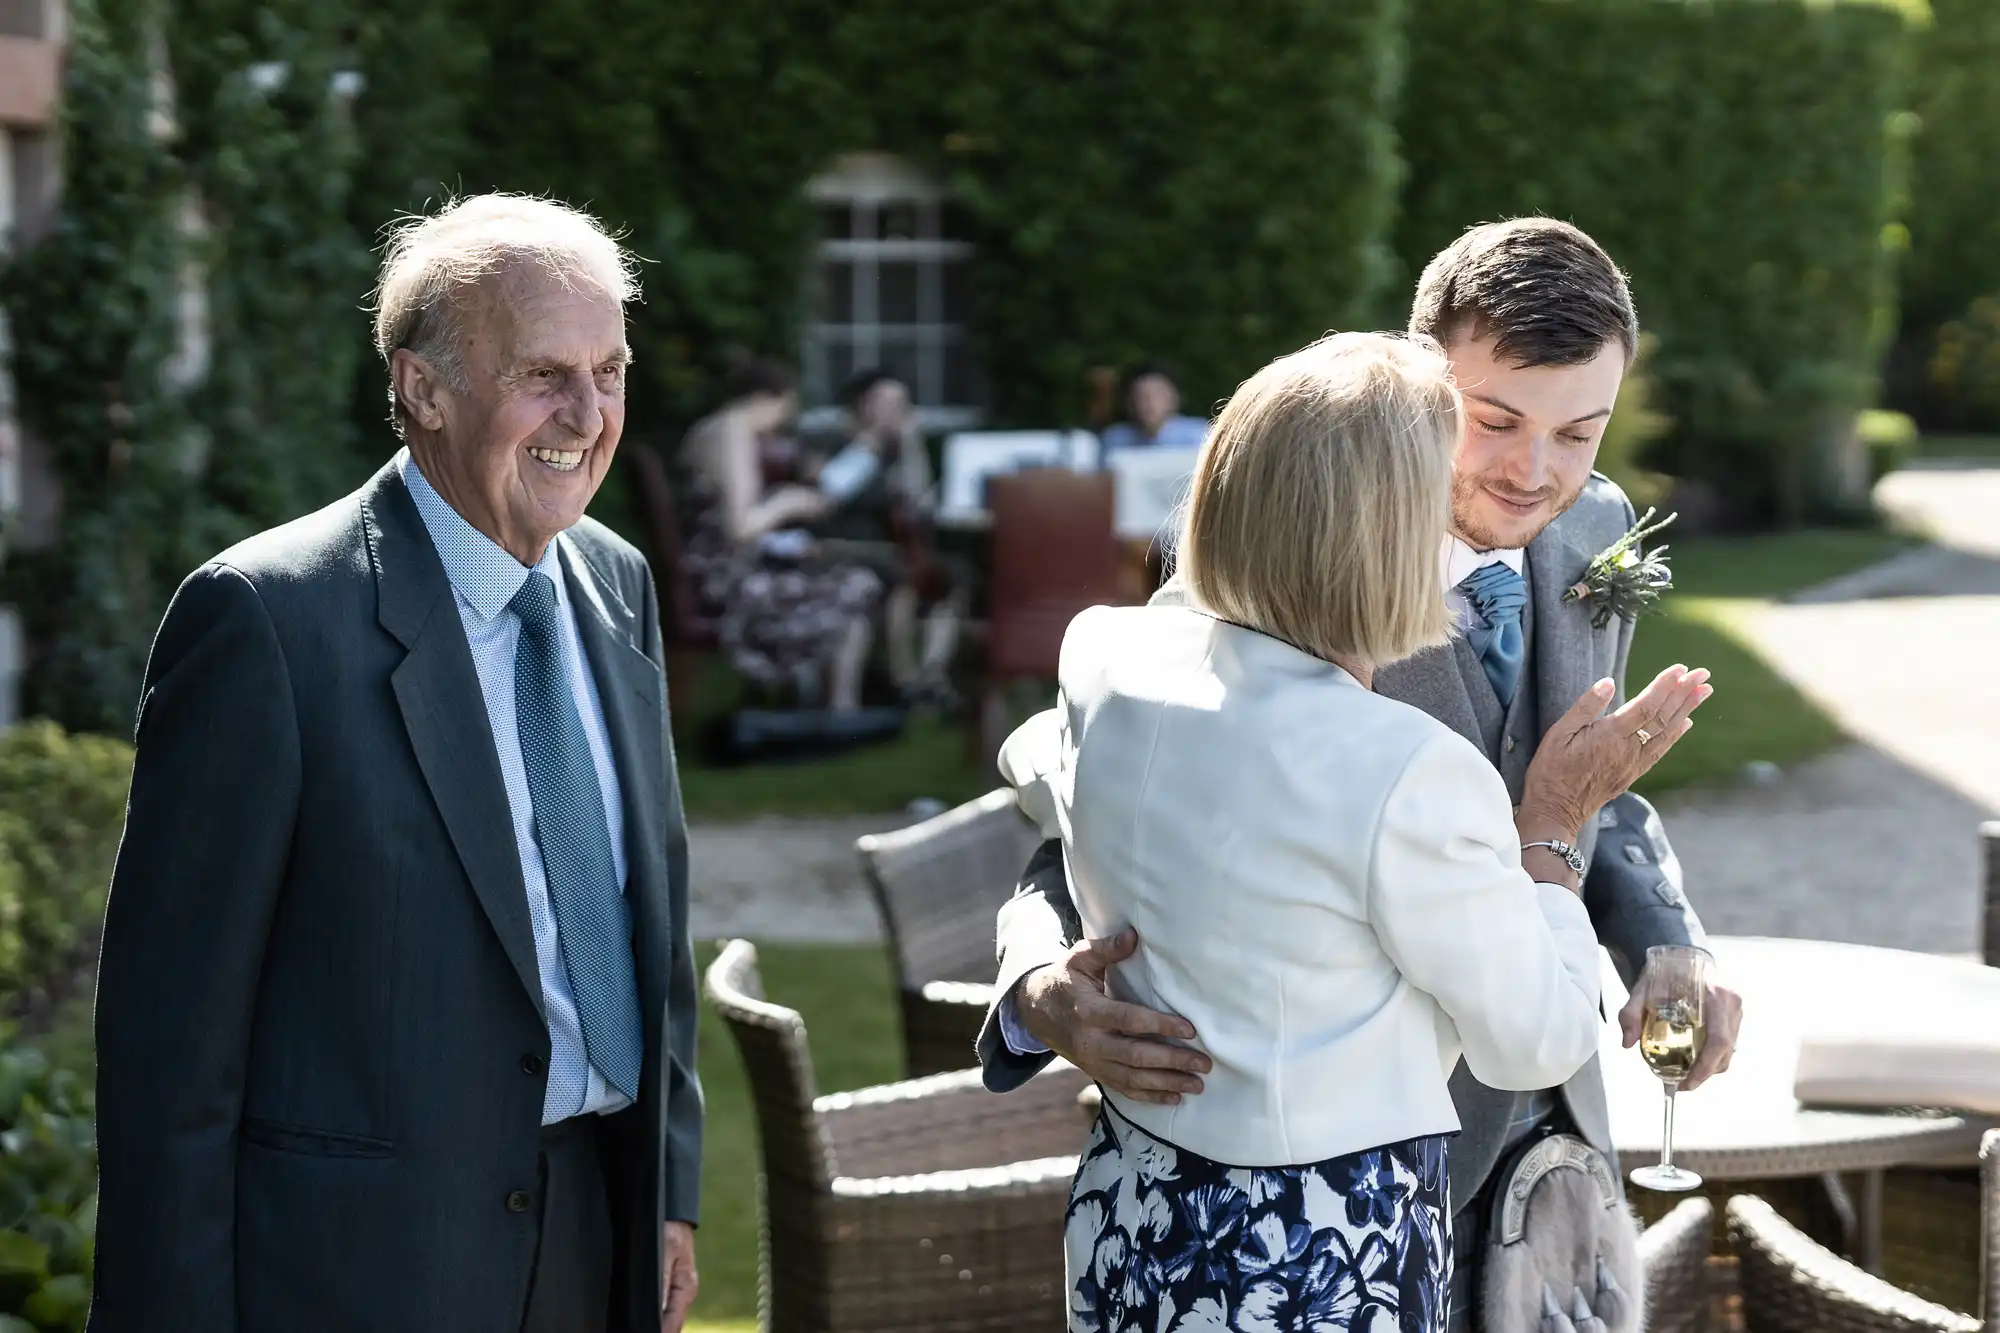 An elderly man smiles while looking on as a younger man in a suit hugs an older woman, all at an outdoor social gathering.